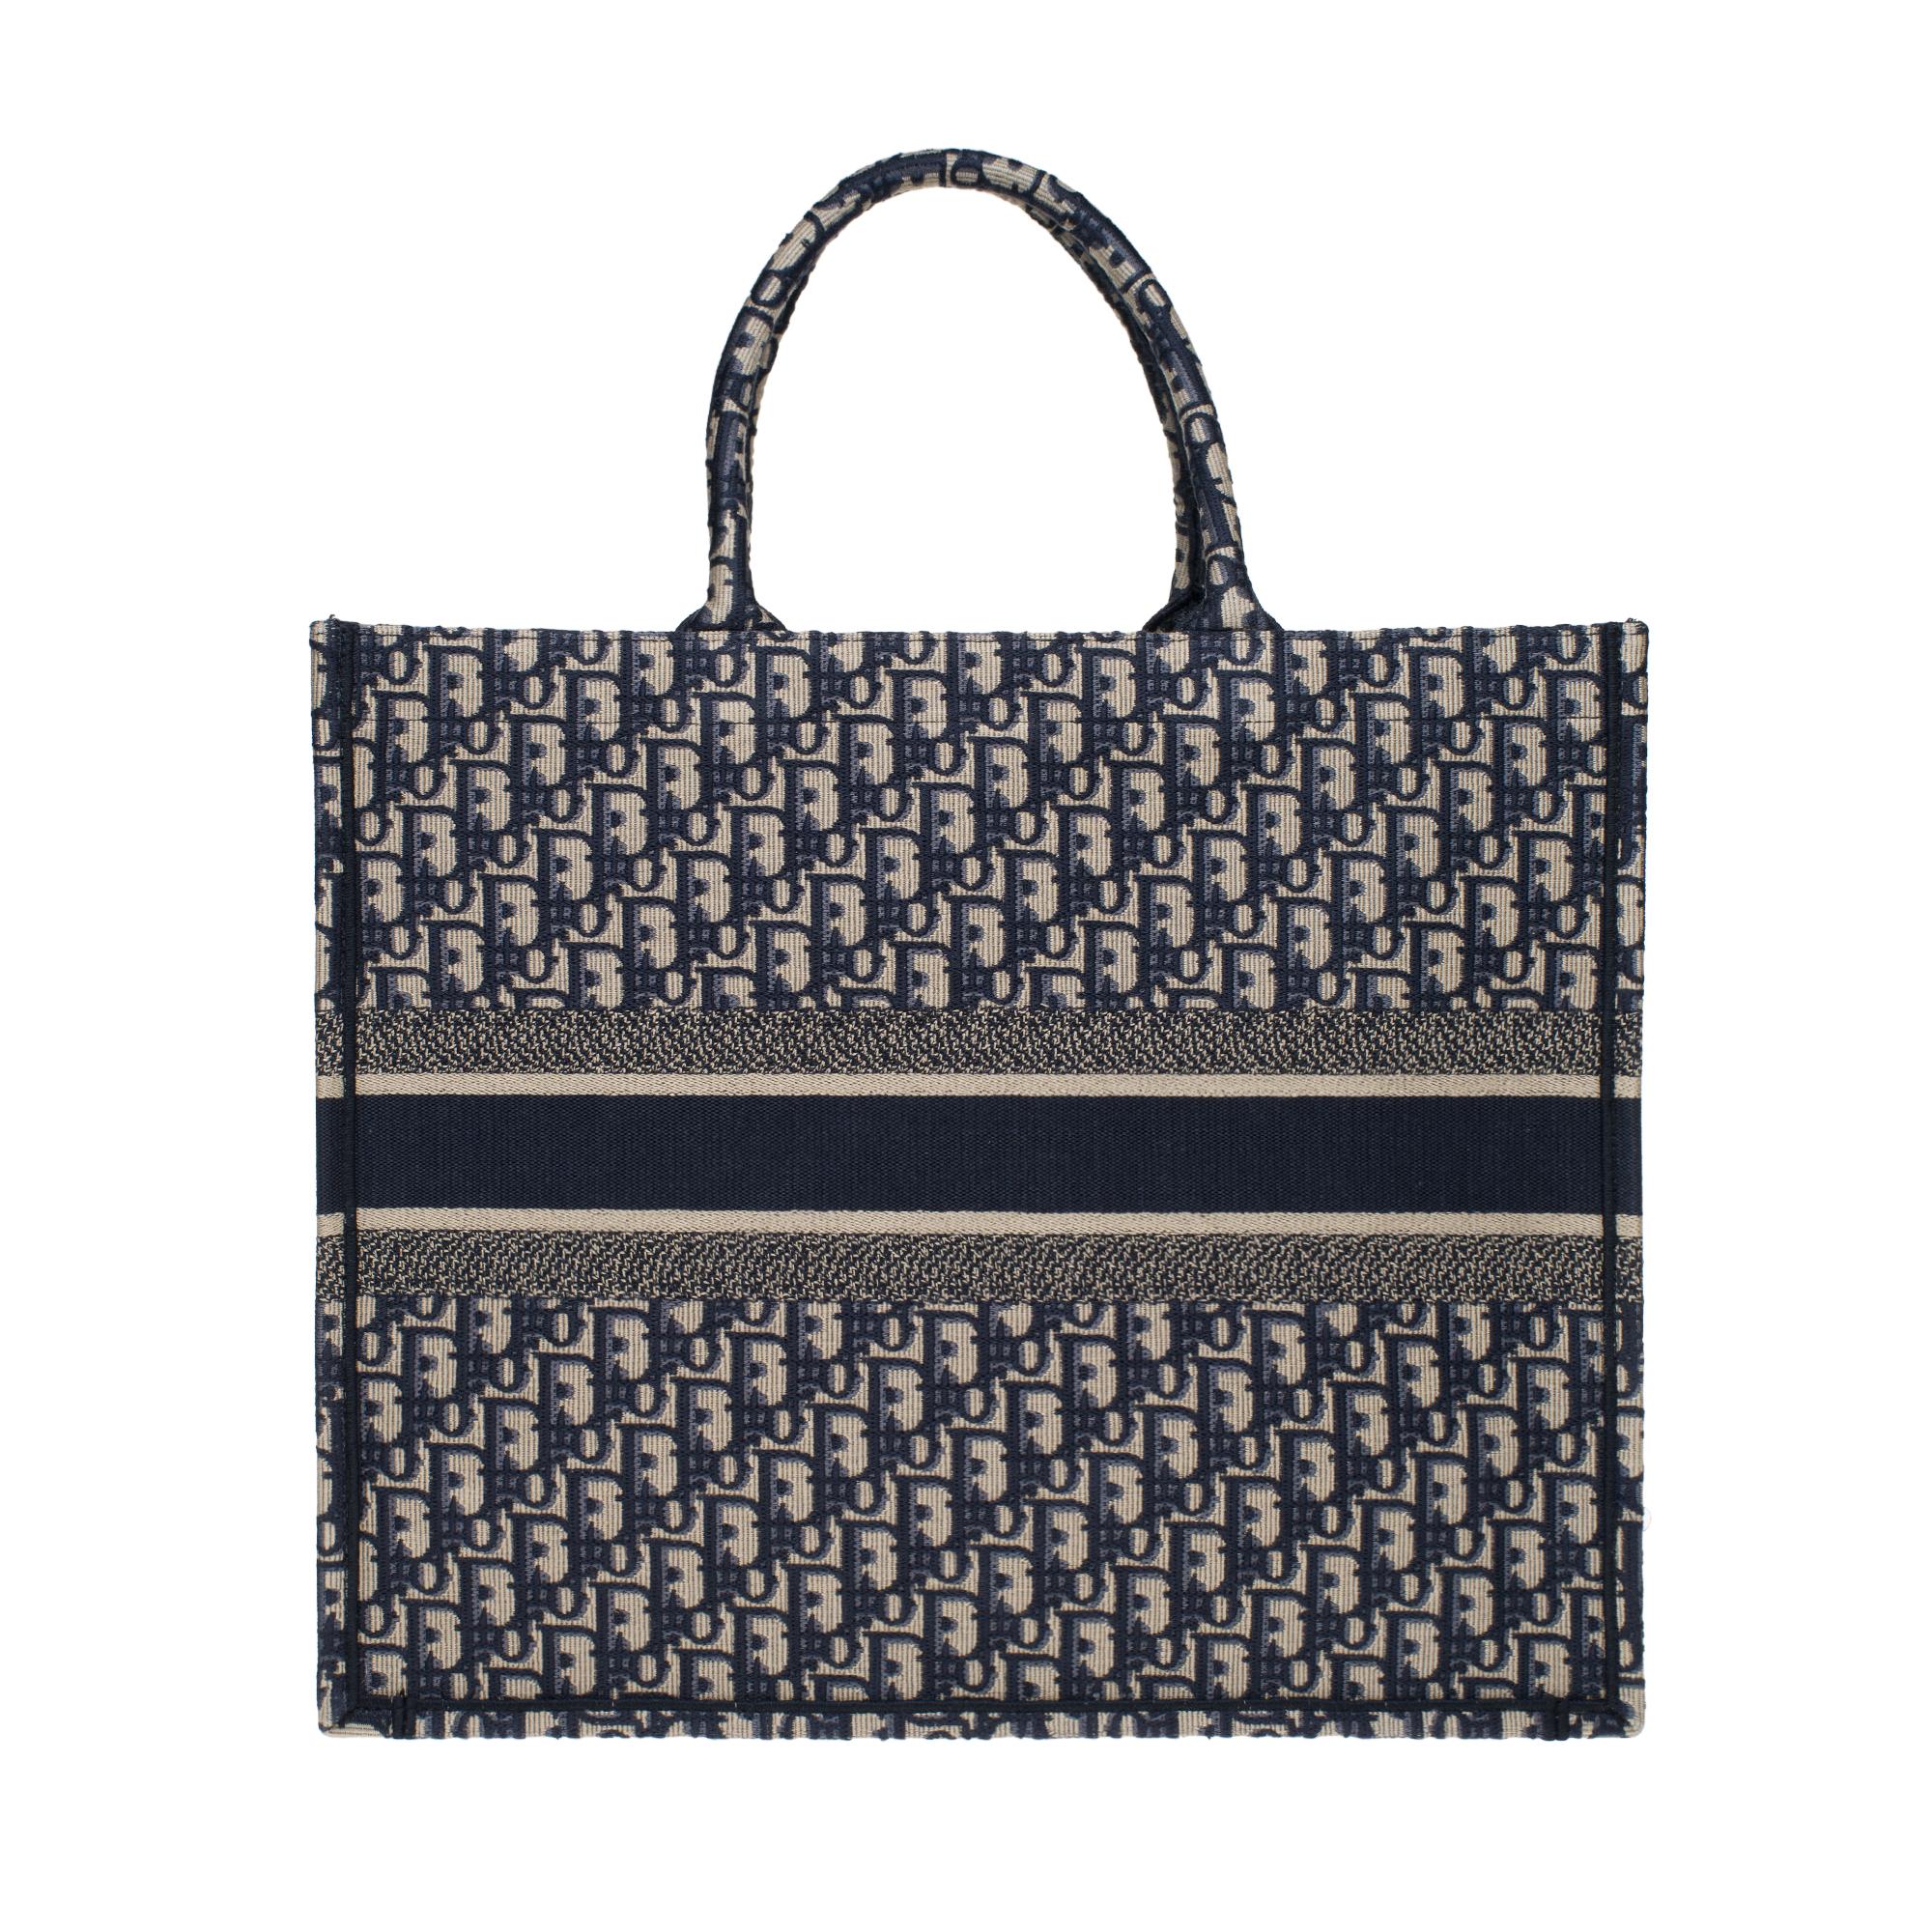 The Iconic Dior Book Tote GM bag in blue monogram canvas, double handle in blue monogram canvas allowing a hand stand.

Interior in blue monogram canvas.
Sold with dustbag, authenticity card.
Signature: 